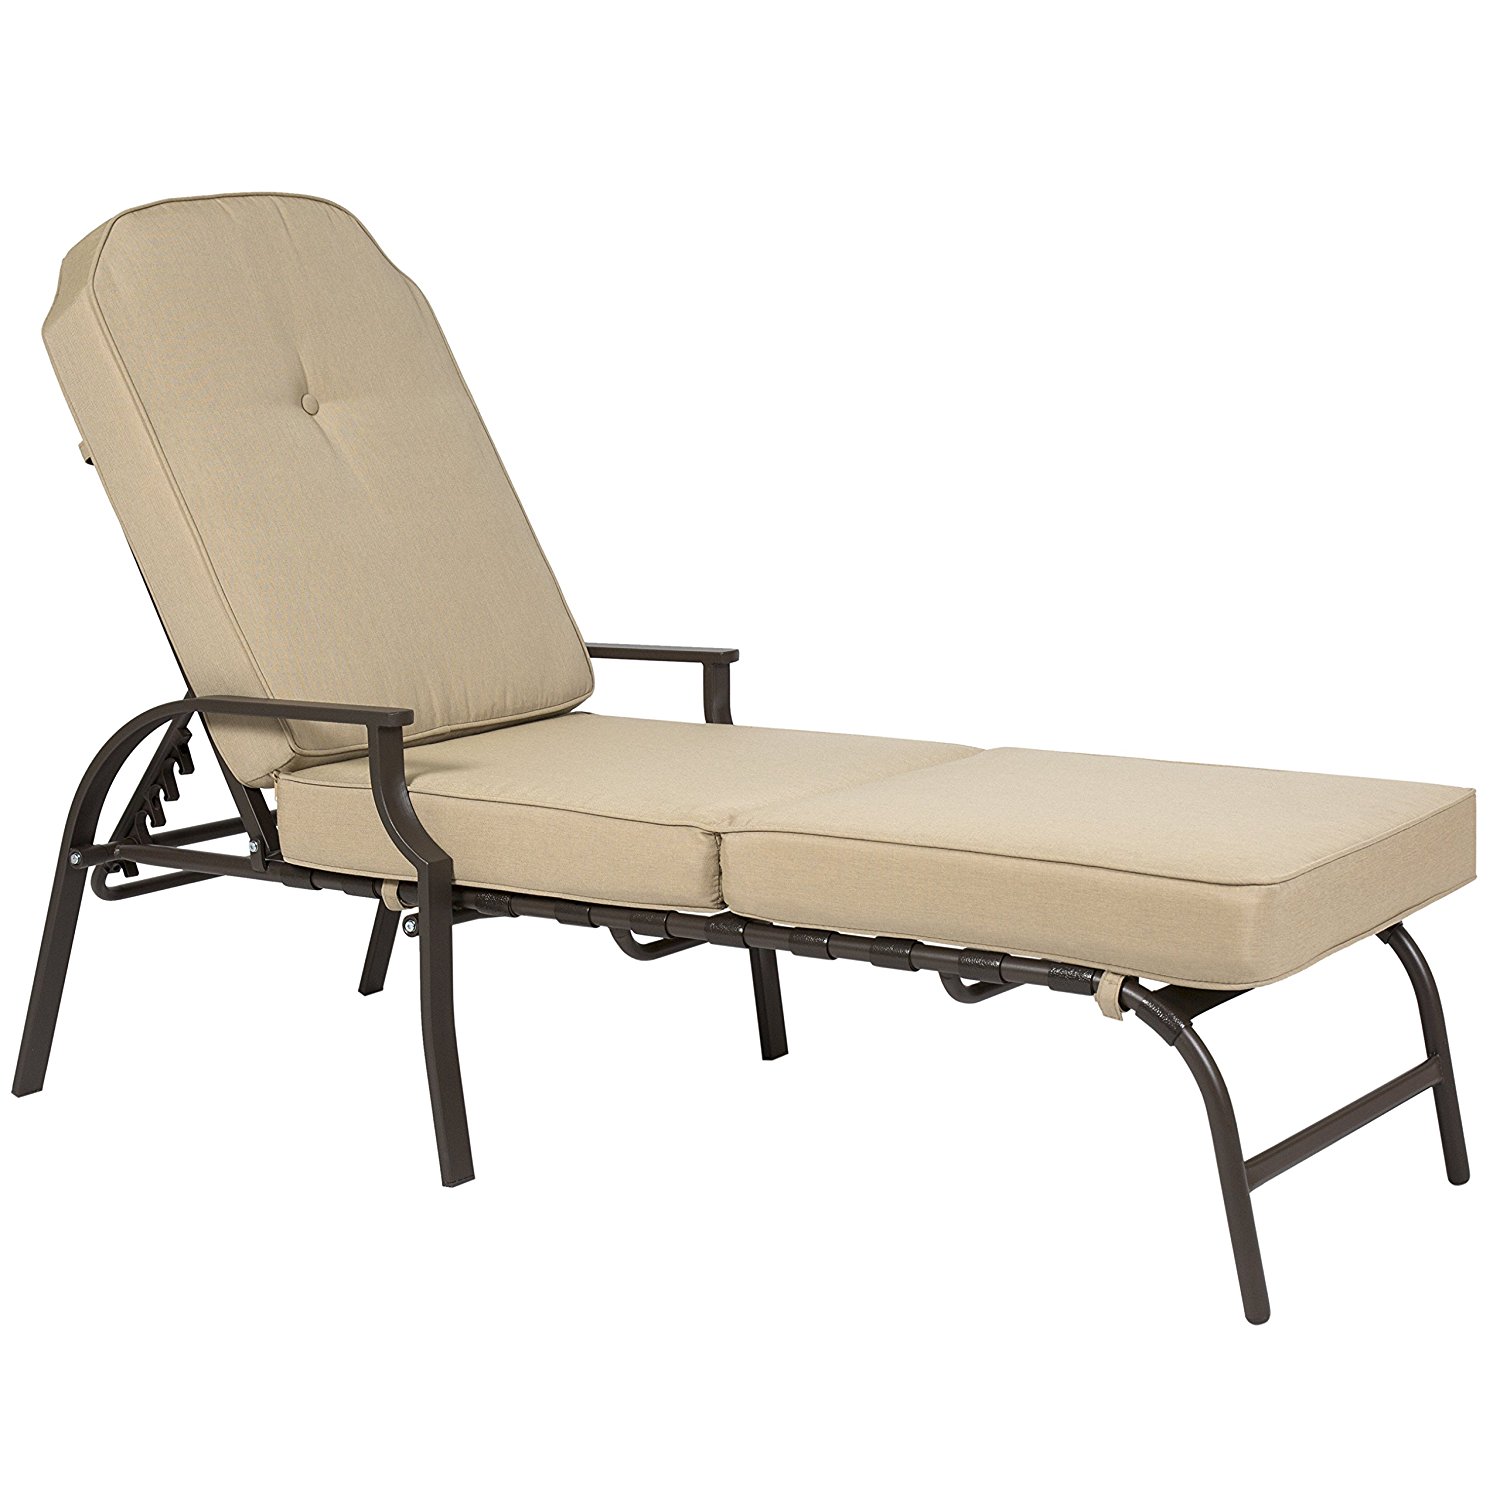 patio chaise lounge amazon.com : best choice products outdoor chaise lounge chair w/ cushion  pool HZFKDLM